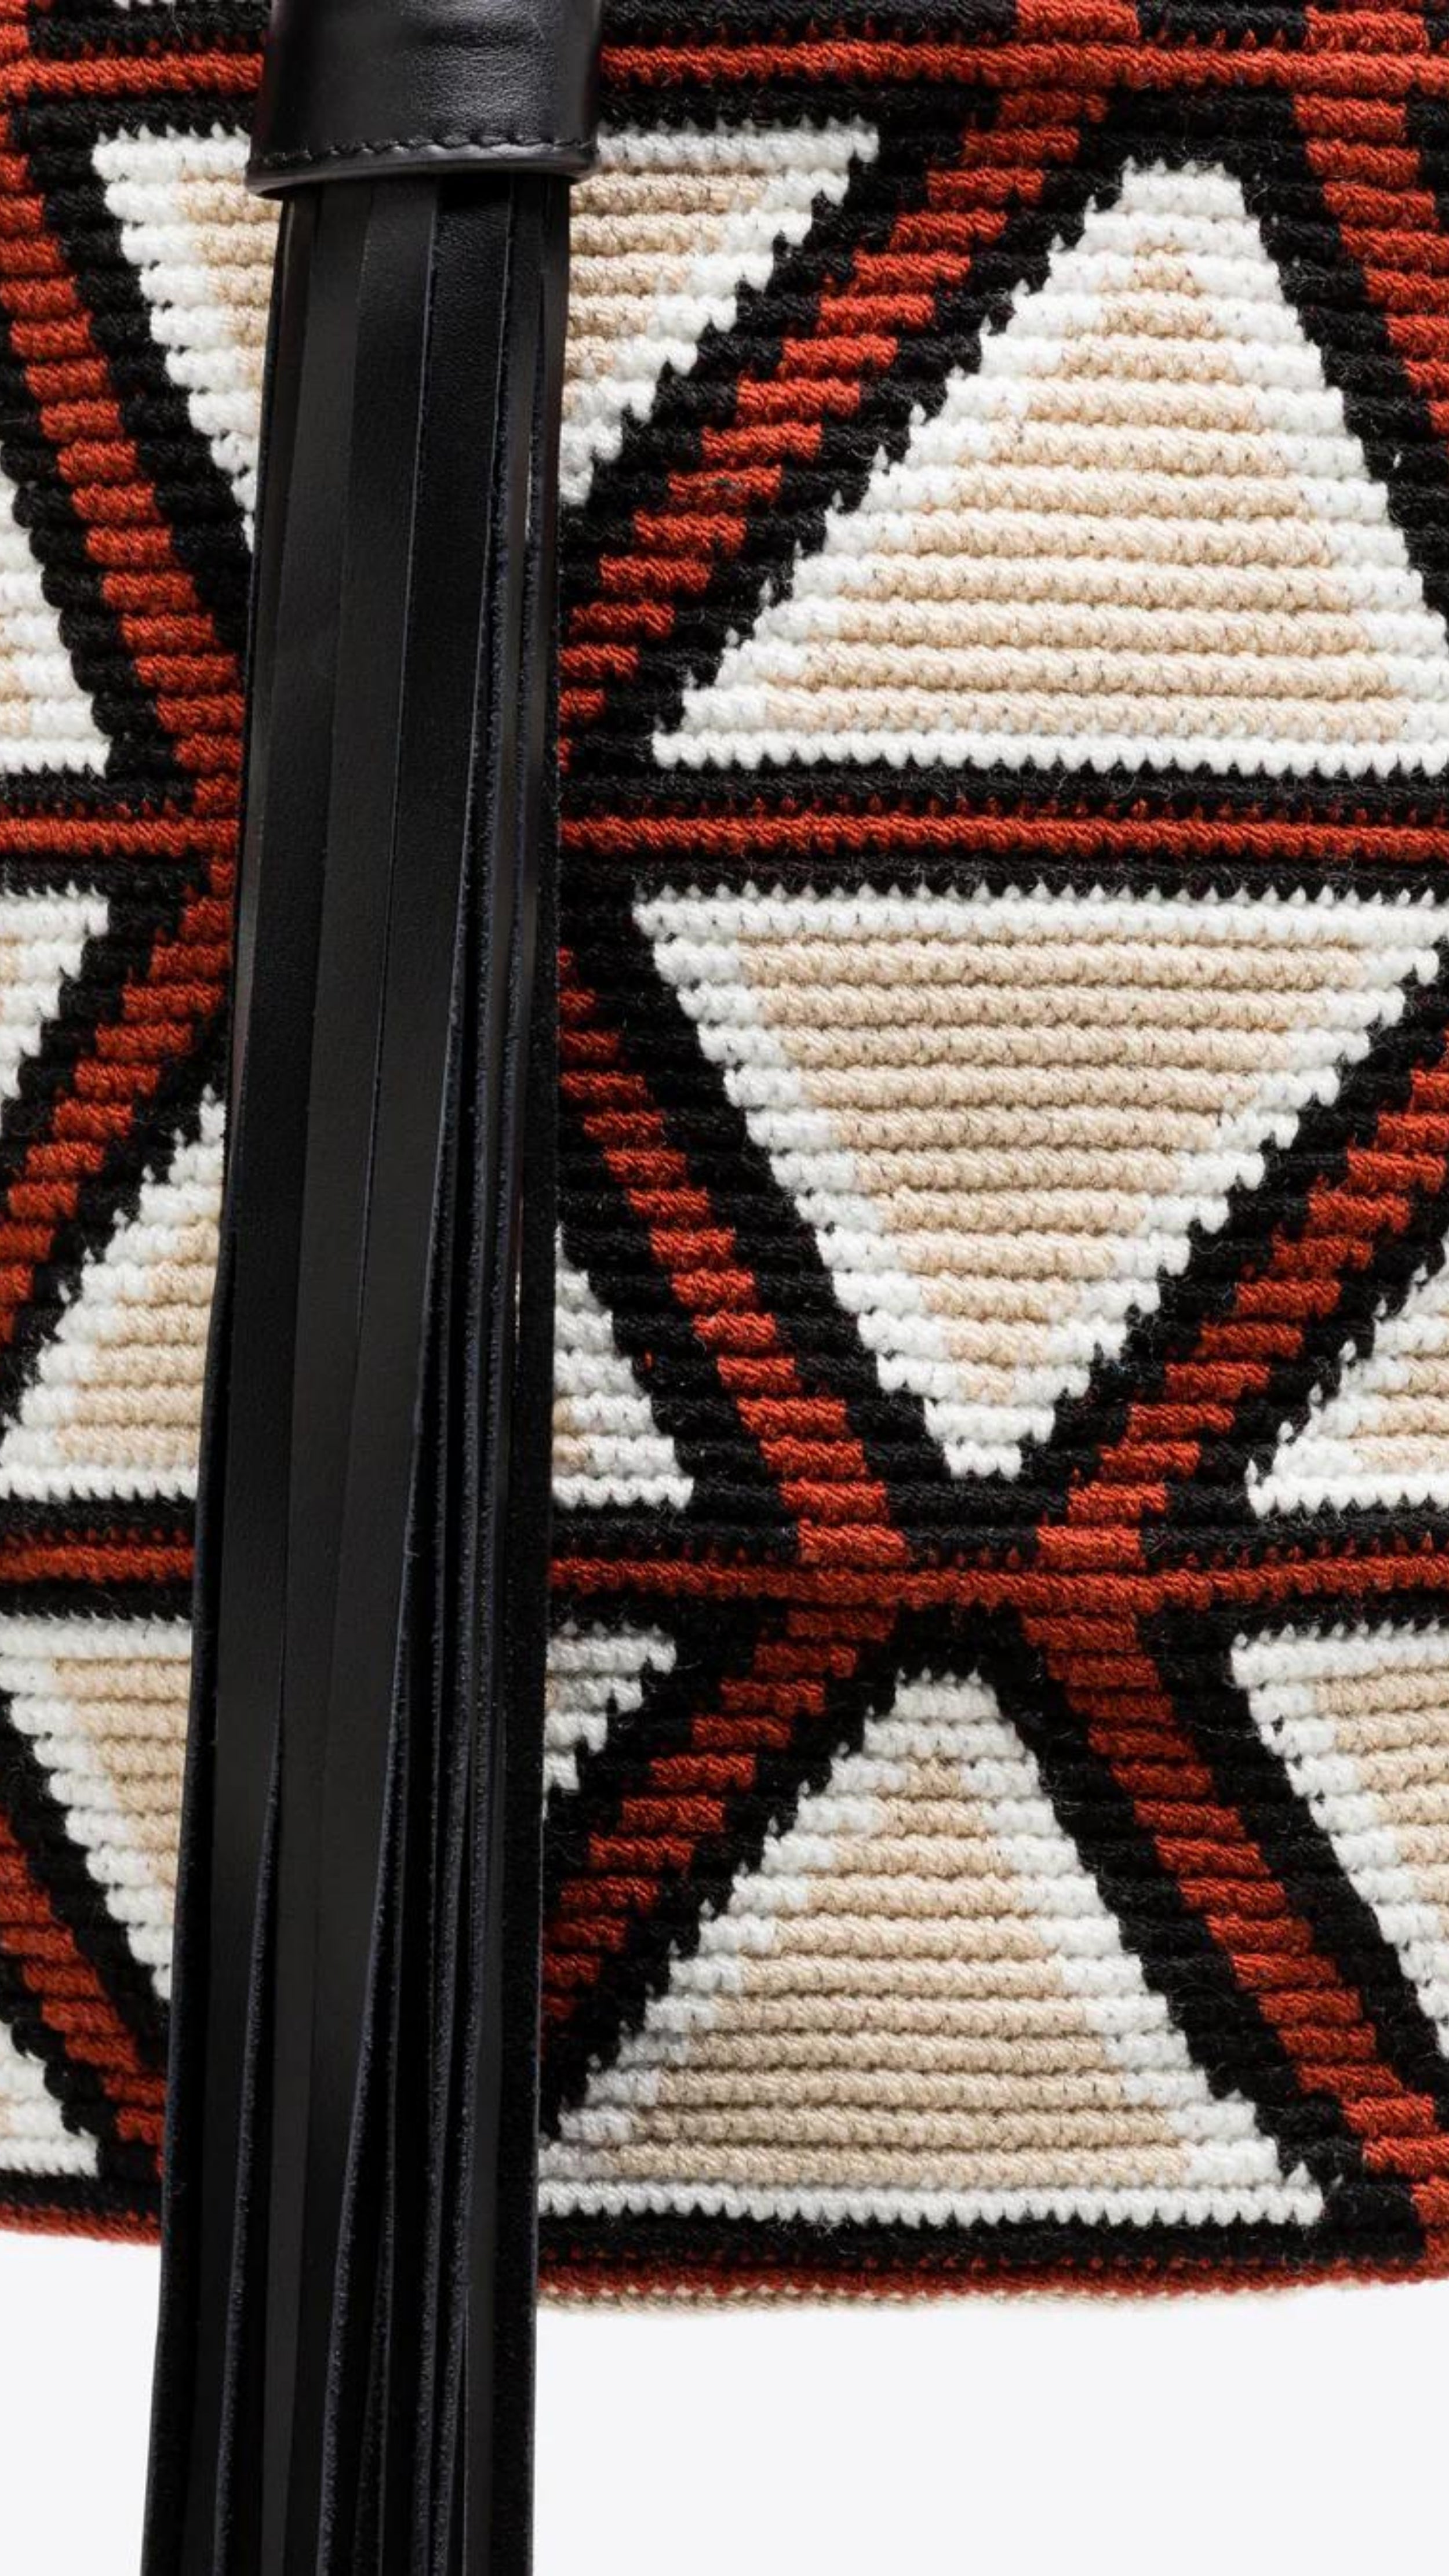 AZ Factory Colville Molly Molloy Lucinda Chambers, WOVEN CABRAS BAG  The Cabras Bag is woven in Wayuu Colombian and finished with Italian leather craftsmanship. Its ecru and burgundy diamond pattern is enhanced with black leather trim and a long black tassel. Detail of purse weaving and tassel